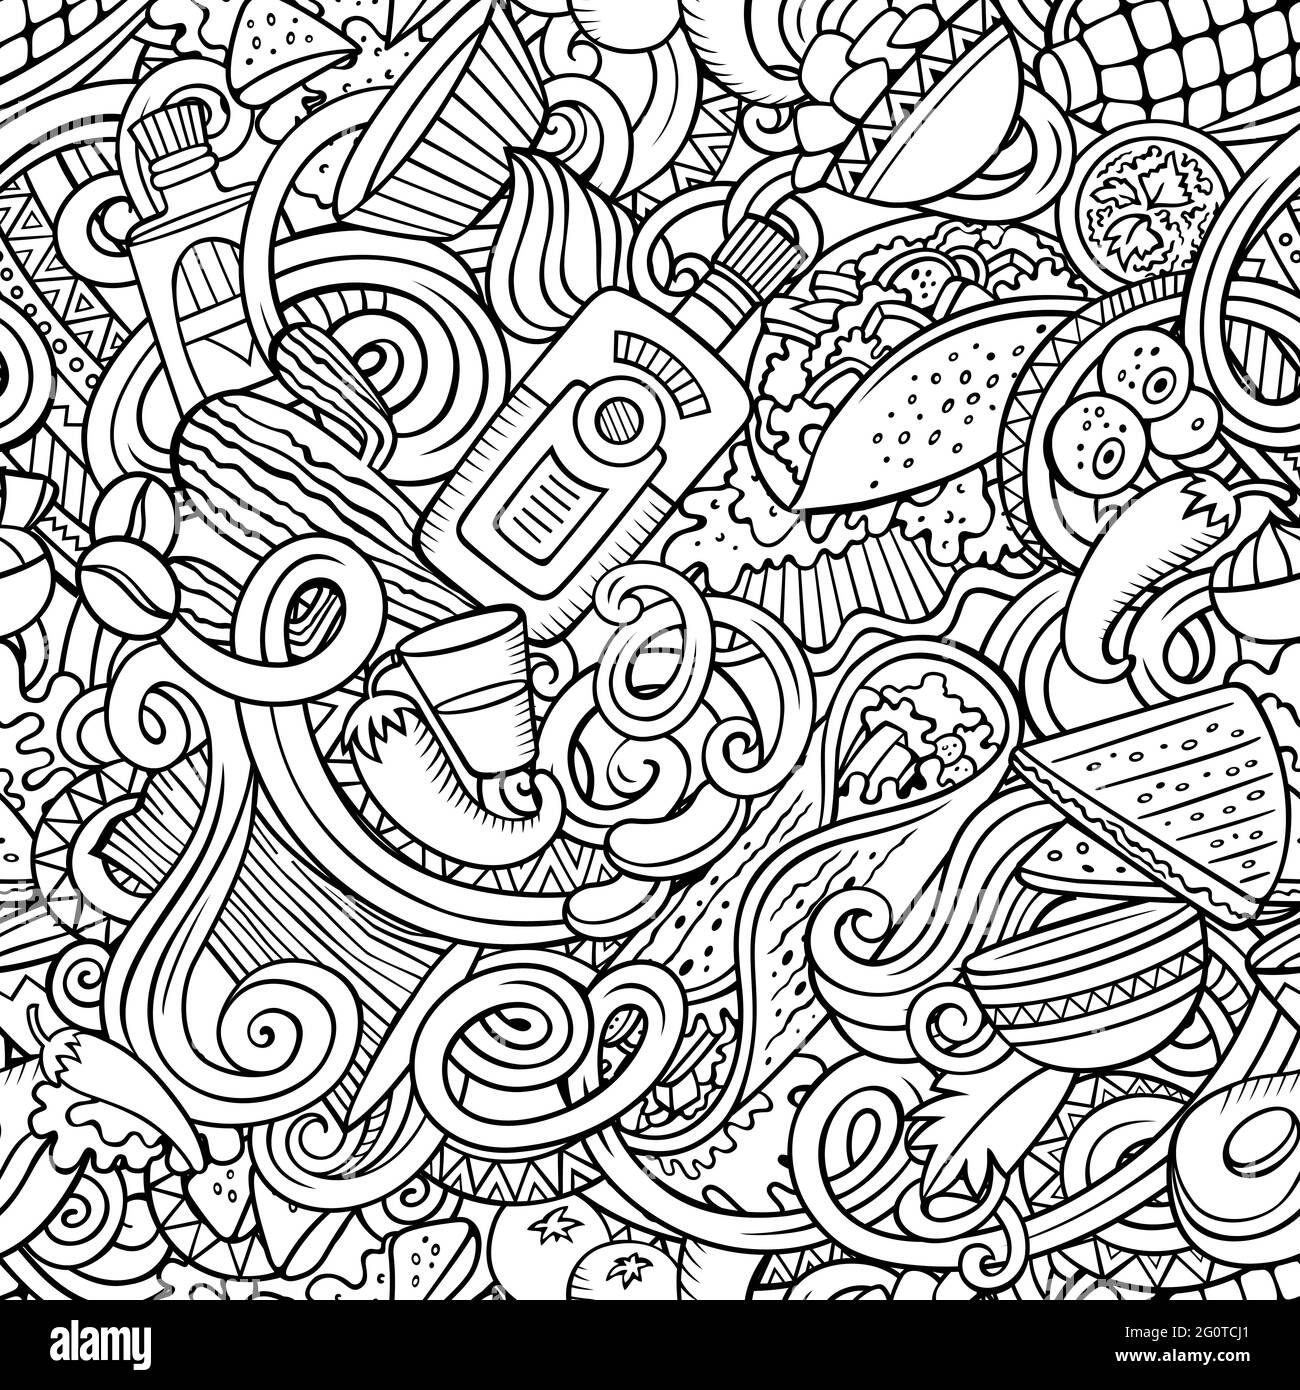 Mexican Food hand drawn doodles seamless pattern. Ethnic Cuisine background. Cartoon ethnicity fabric print design. Sketchy vector illustration Stock Vector